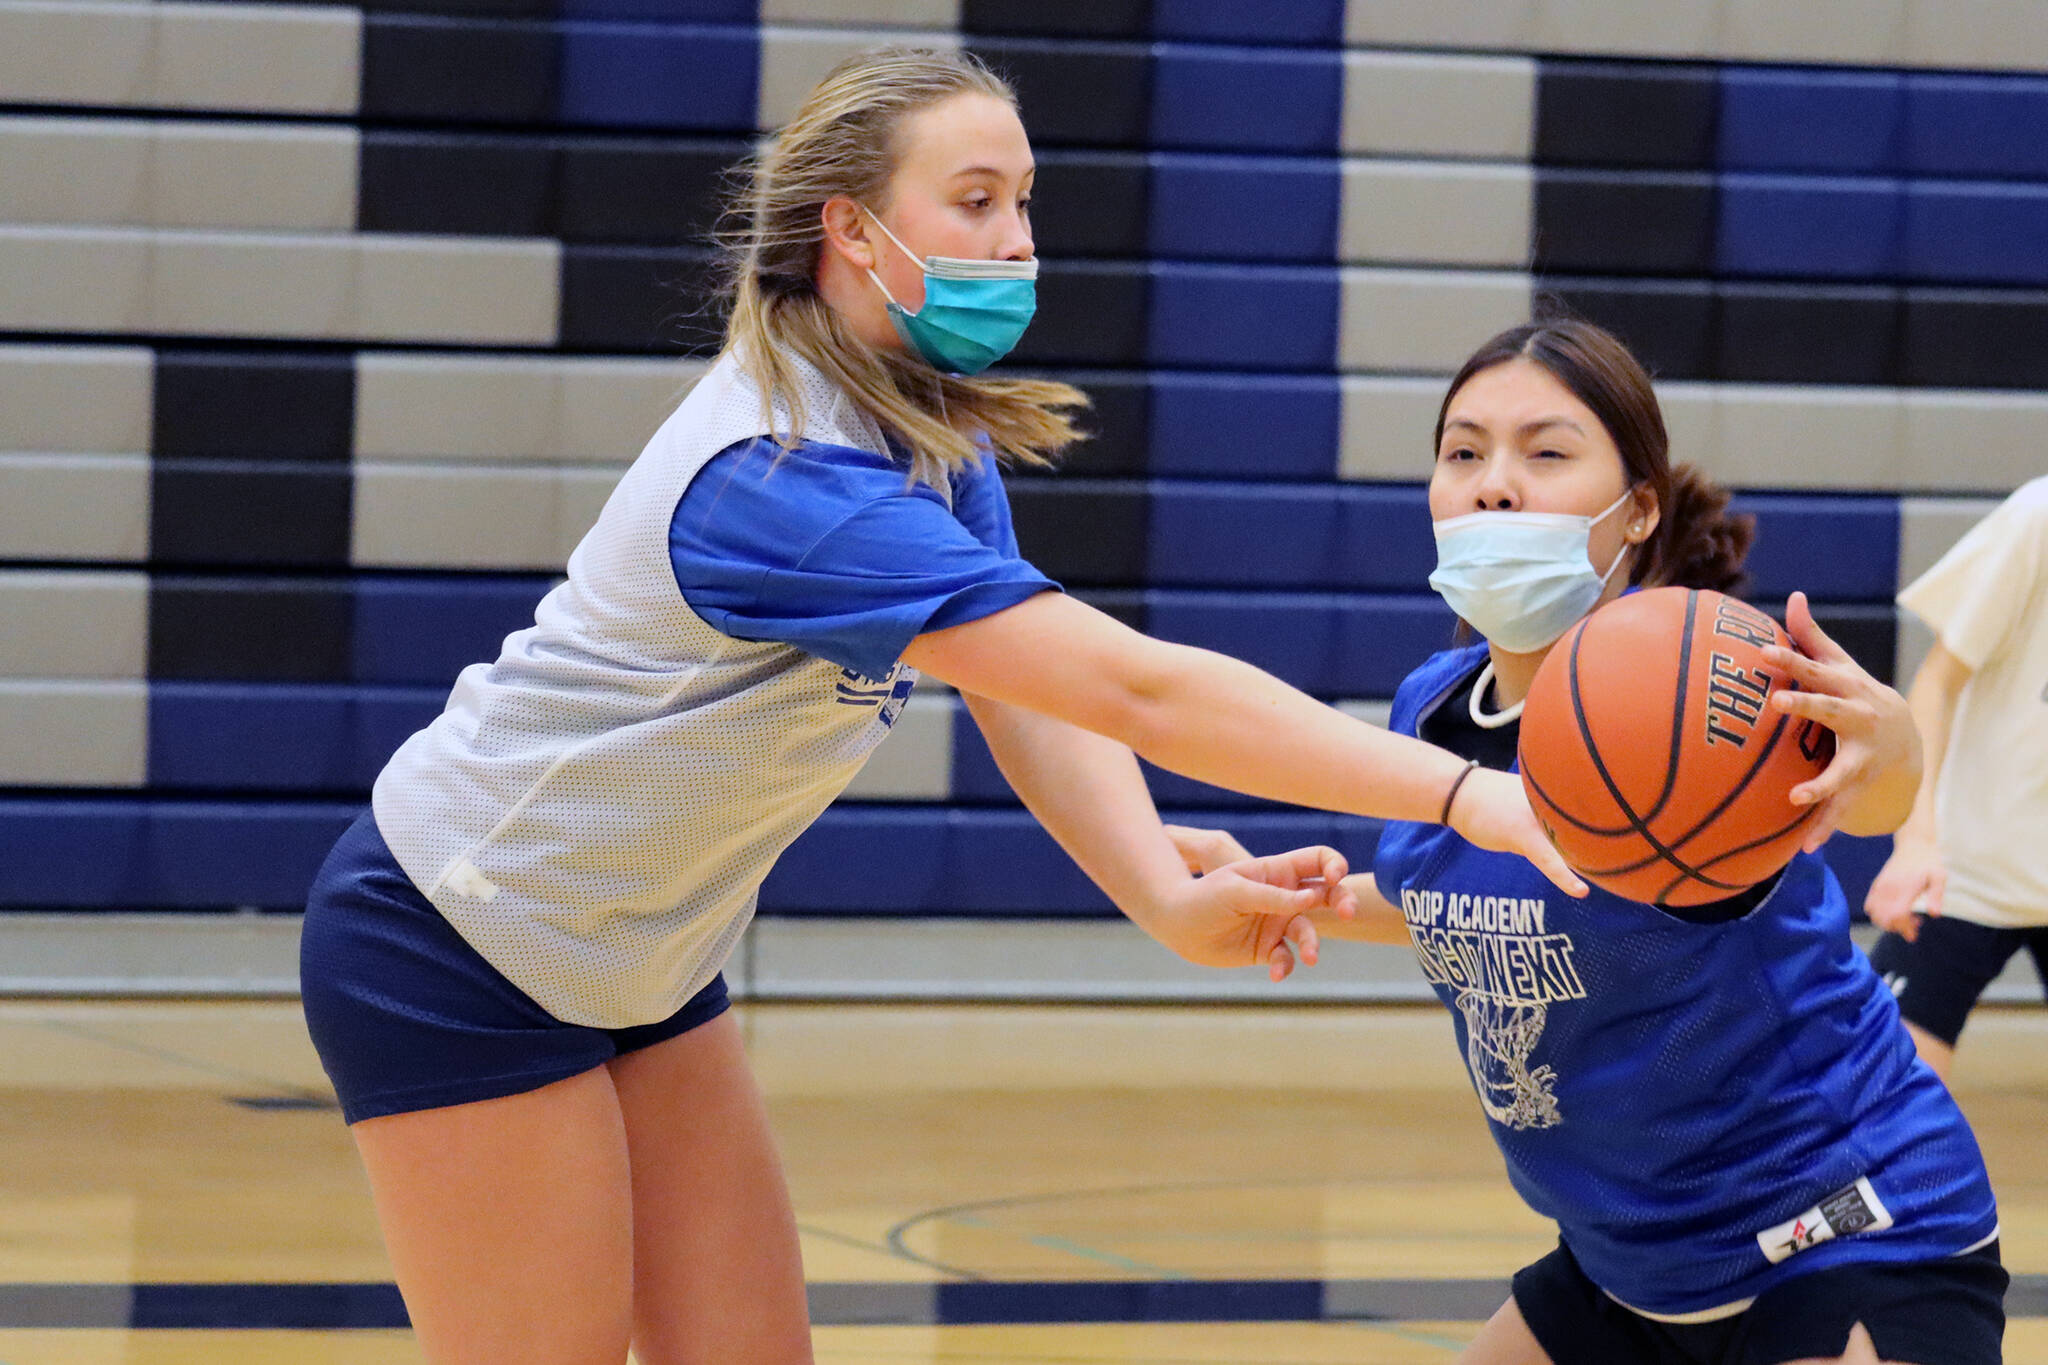 Kiara Kookesh (right) gets a hand on an attempted pass from Ashlyn Gates during a practice drill at Thunder Mountain High School. (Ben Hohenstatt / Juneau Empire)